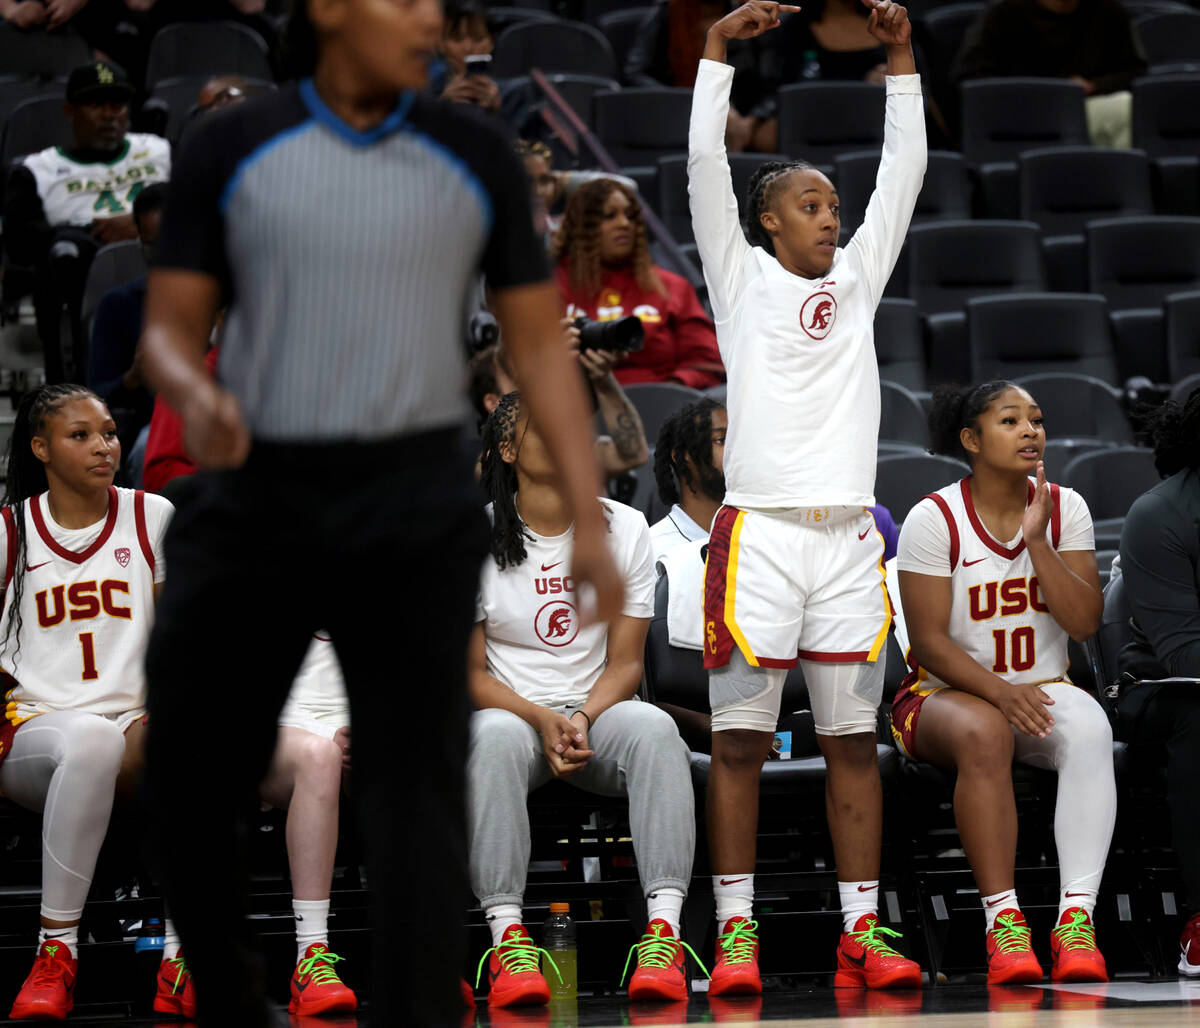 Former Spring Valley High basketball star Aaliyah Gayles, standing, cheers with her USC teammat ...